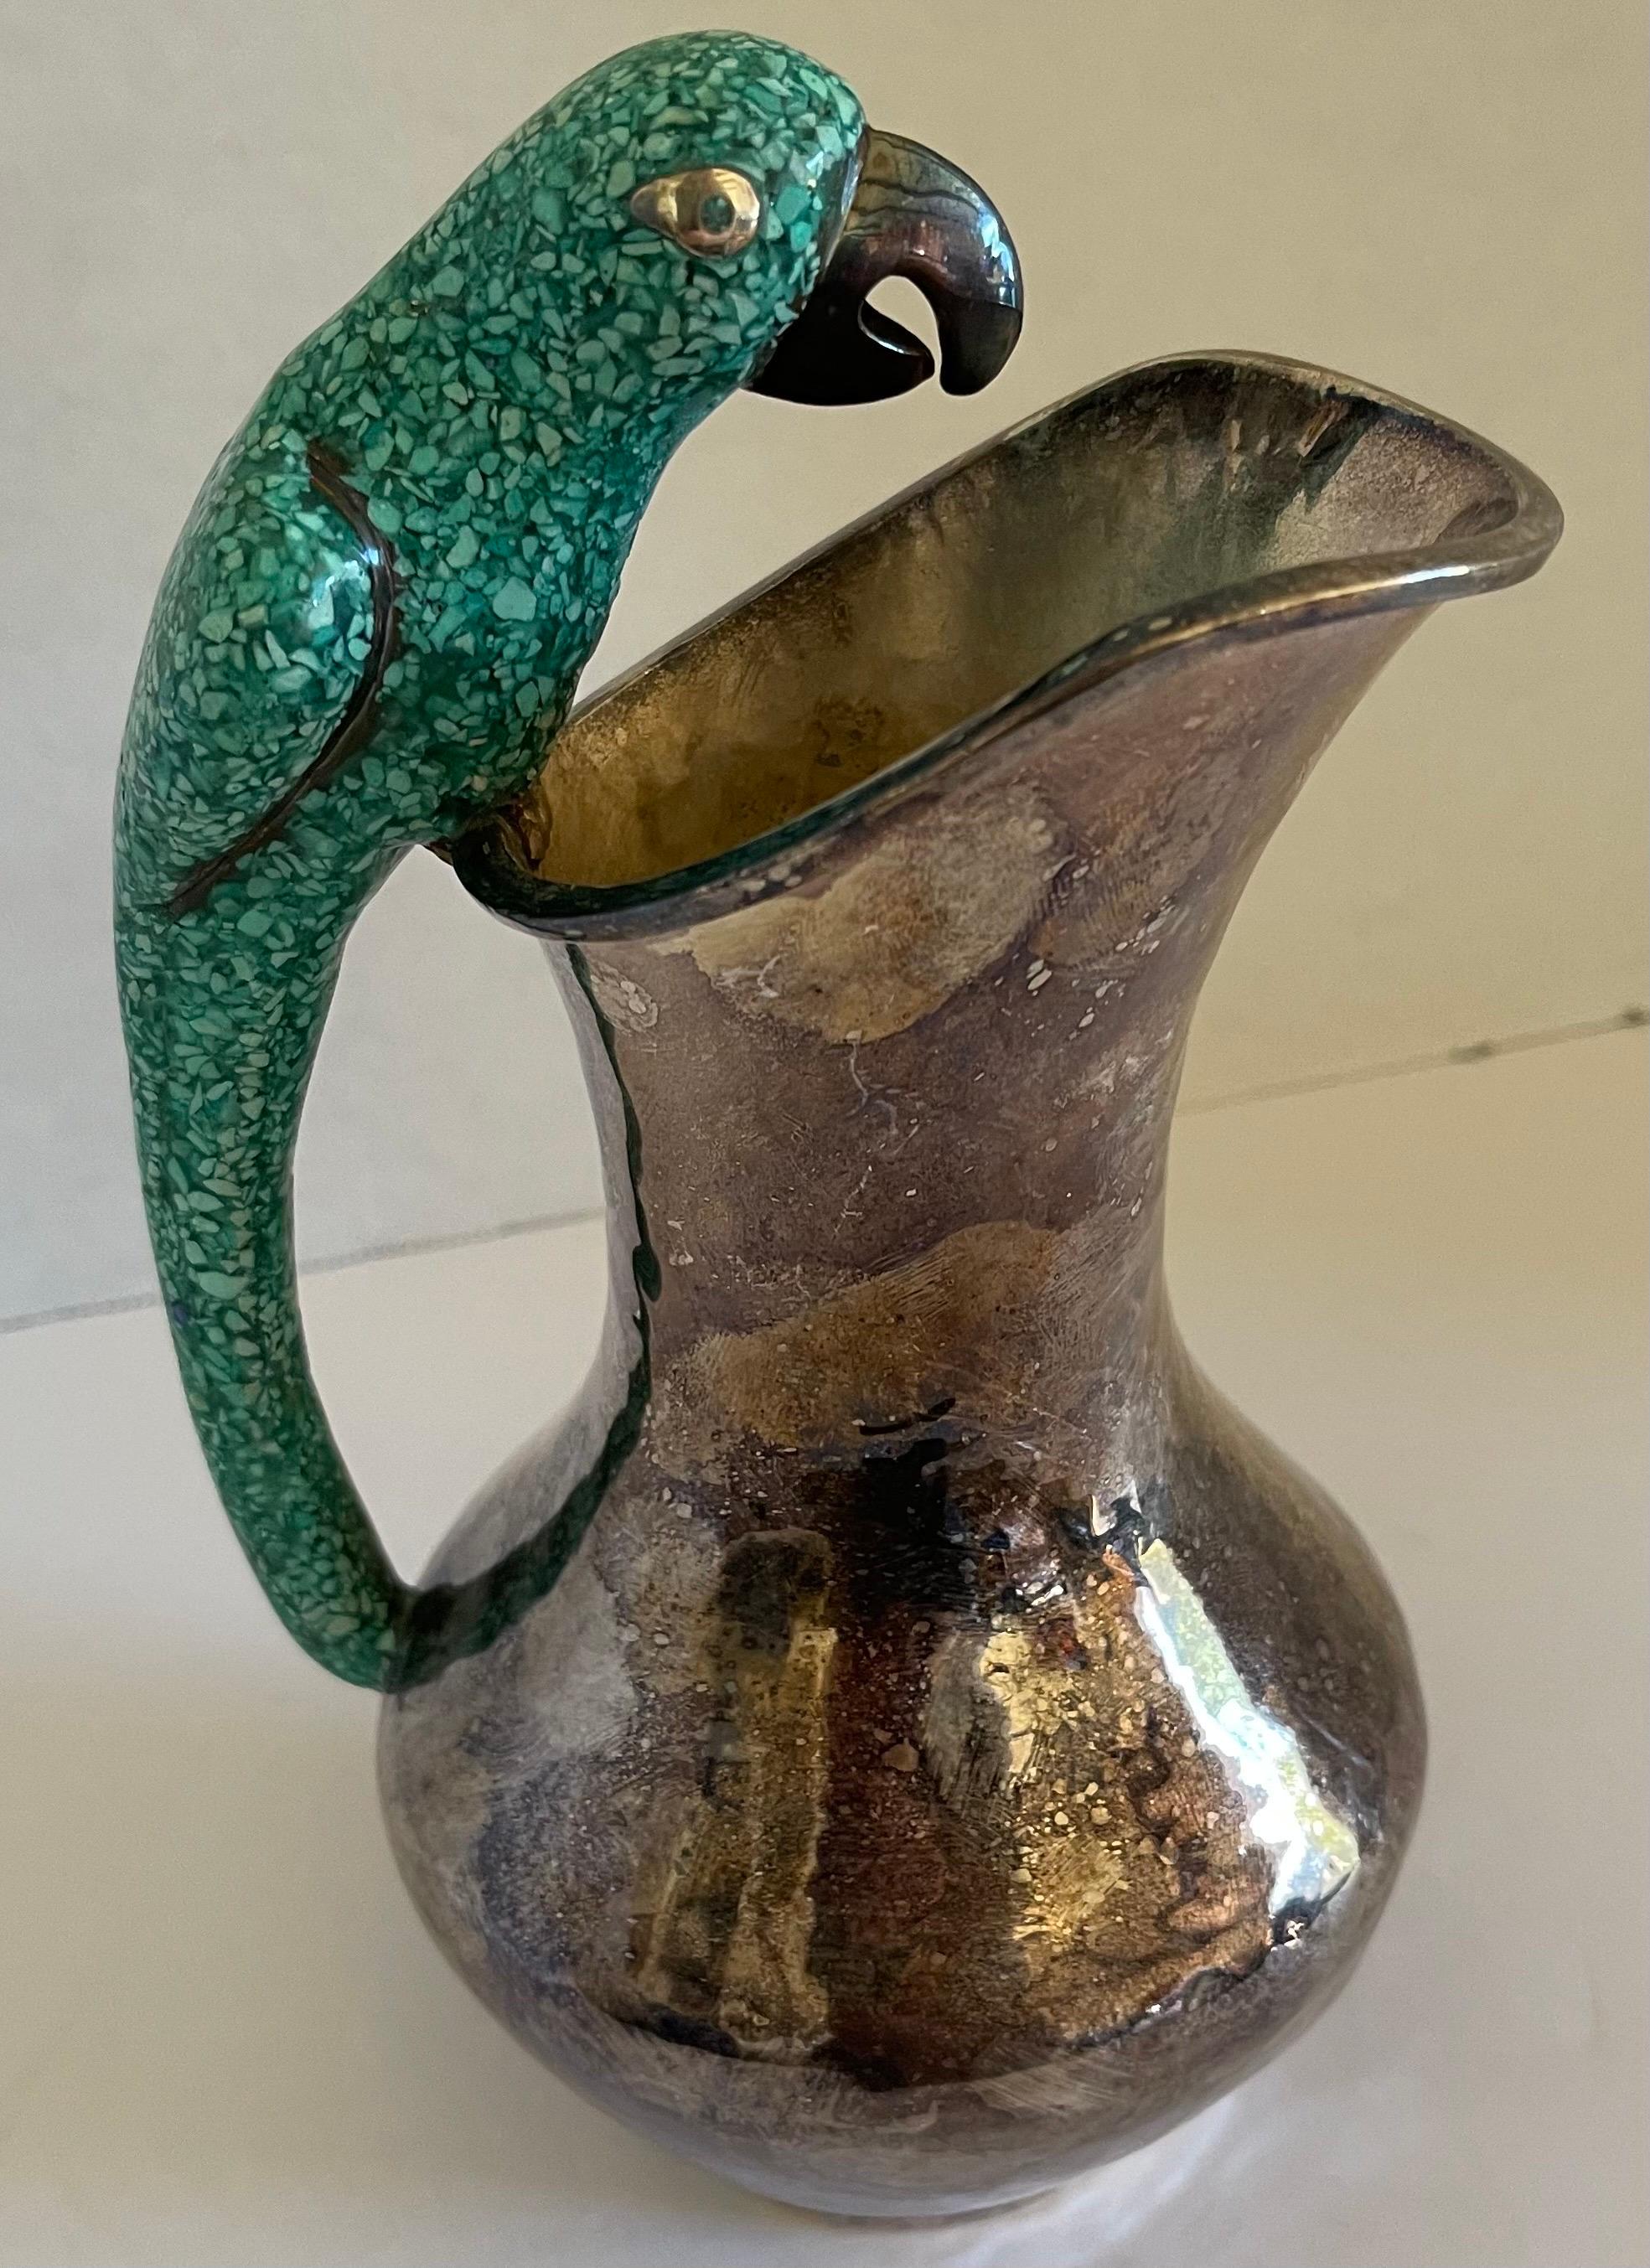 Mexican Los Castillo style parrot handle pitcher. Silver plate with lightly hammered finish and green stone parrot handle. Heavy and well made. 
No makers mark or brand stamp.
Pitcher will be polished before shipping. 